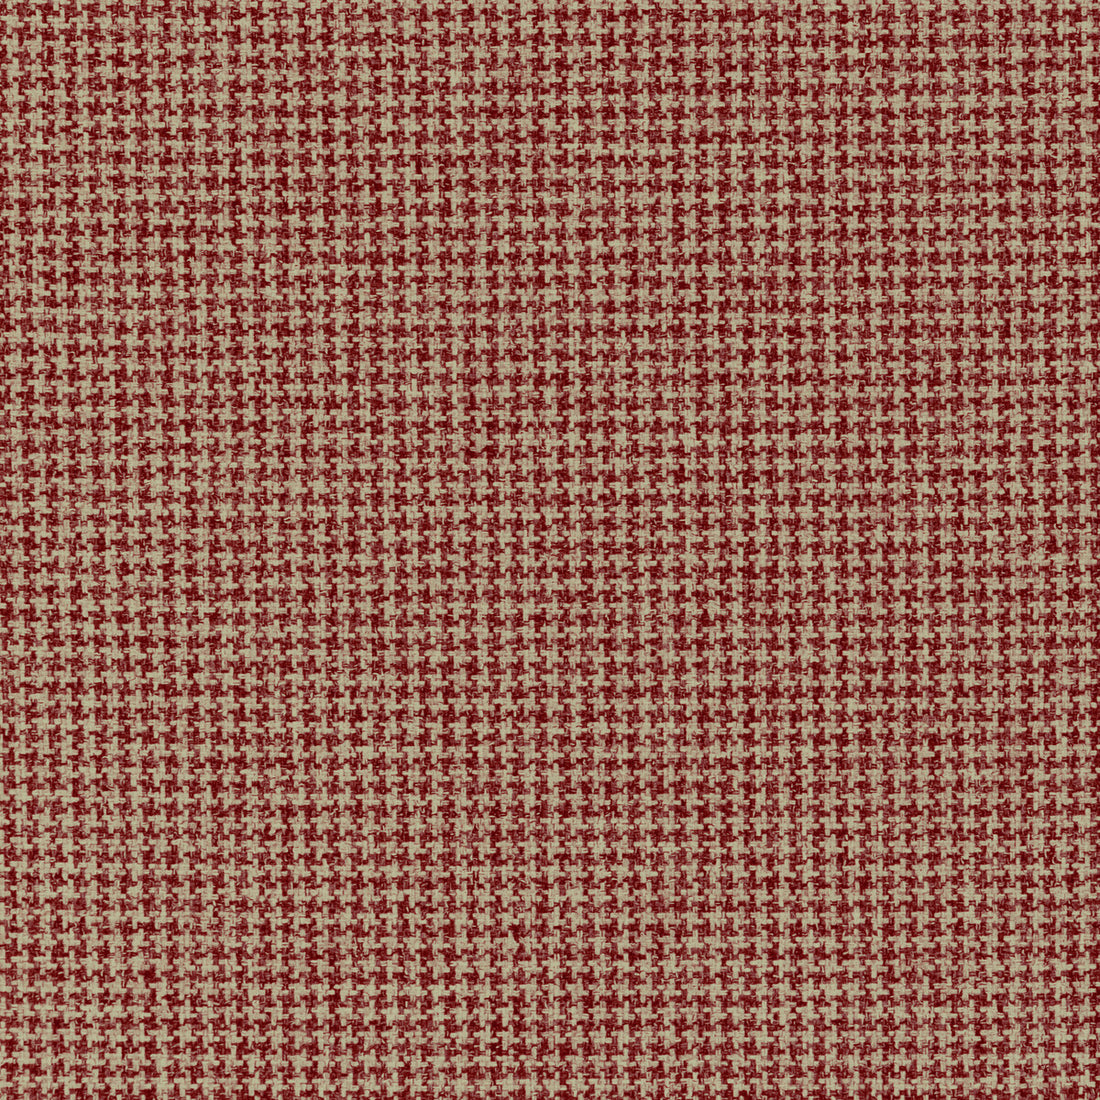 Steamboat fabric in cranberry color - pattern 36258.916.0 - by Kravet Contract in the Supreen collection